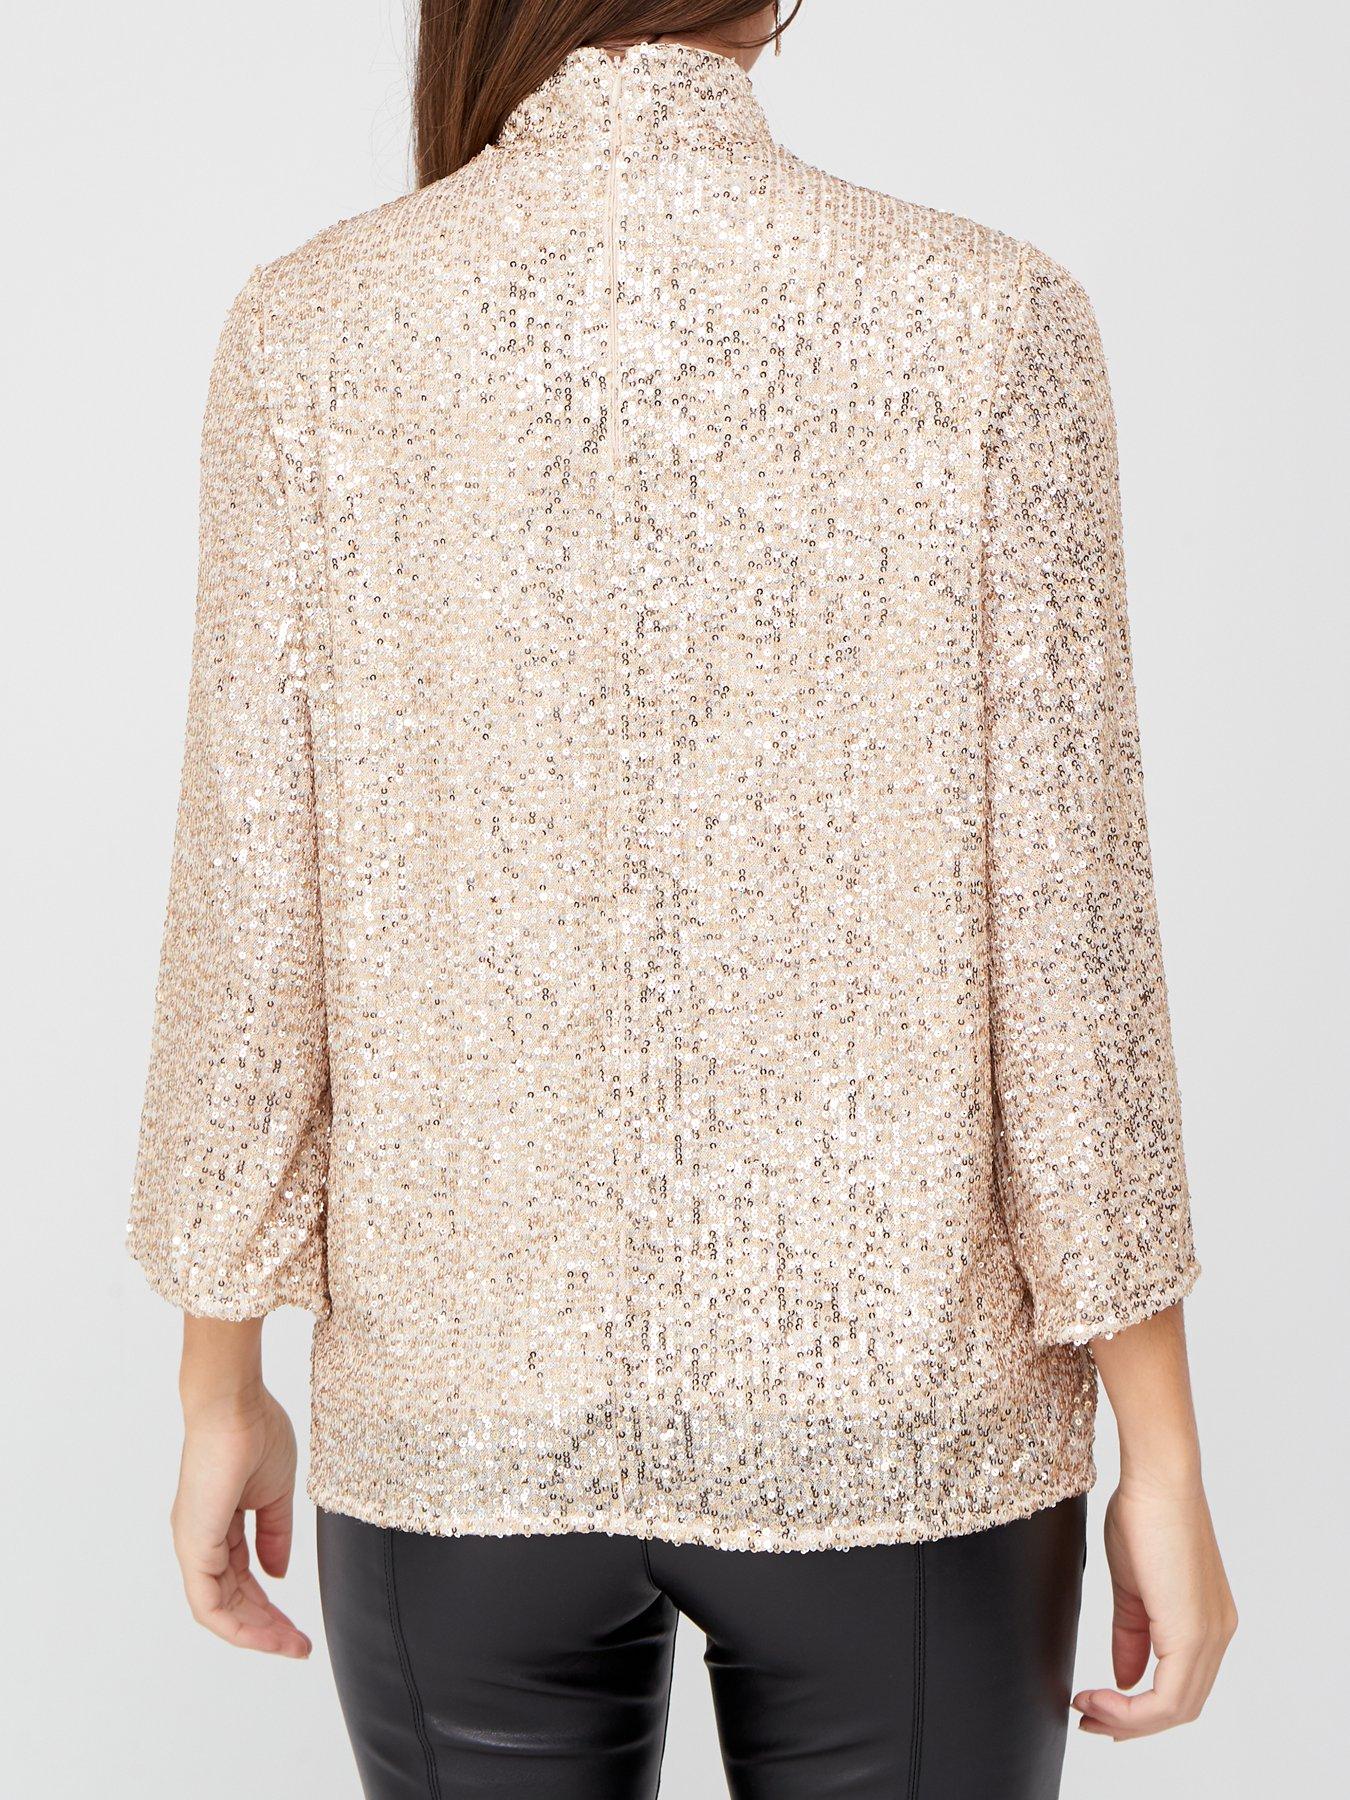 v by very sequin top